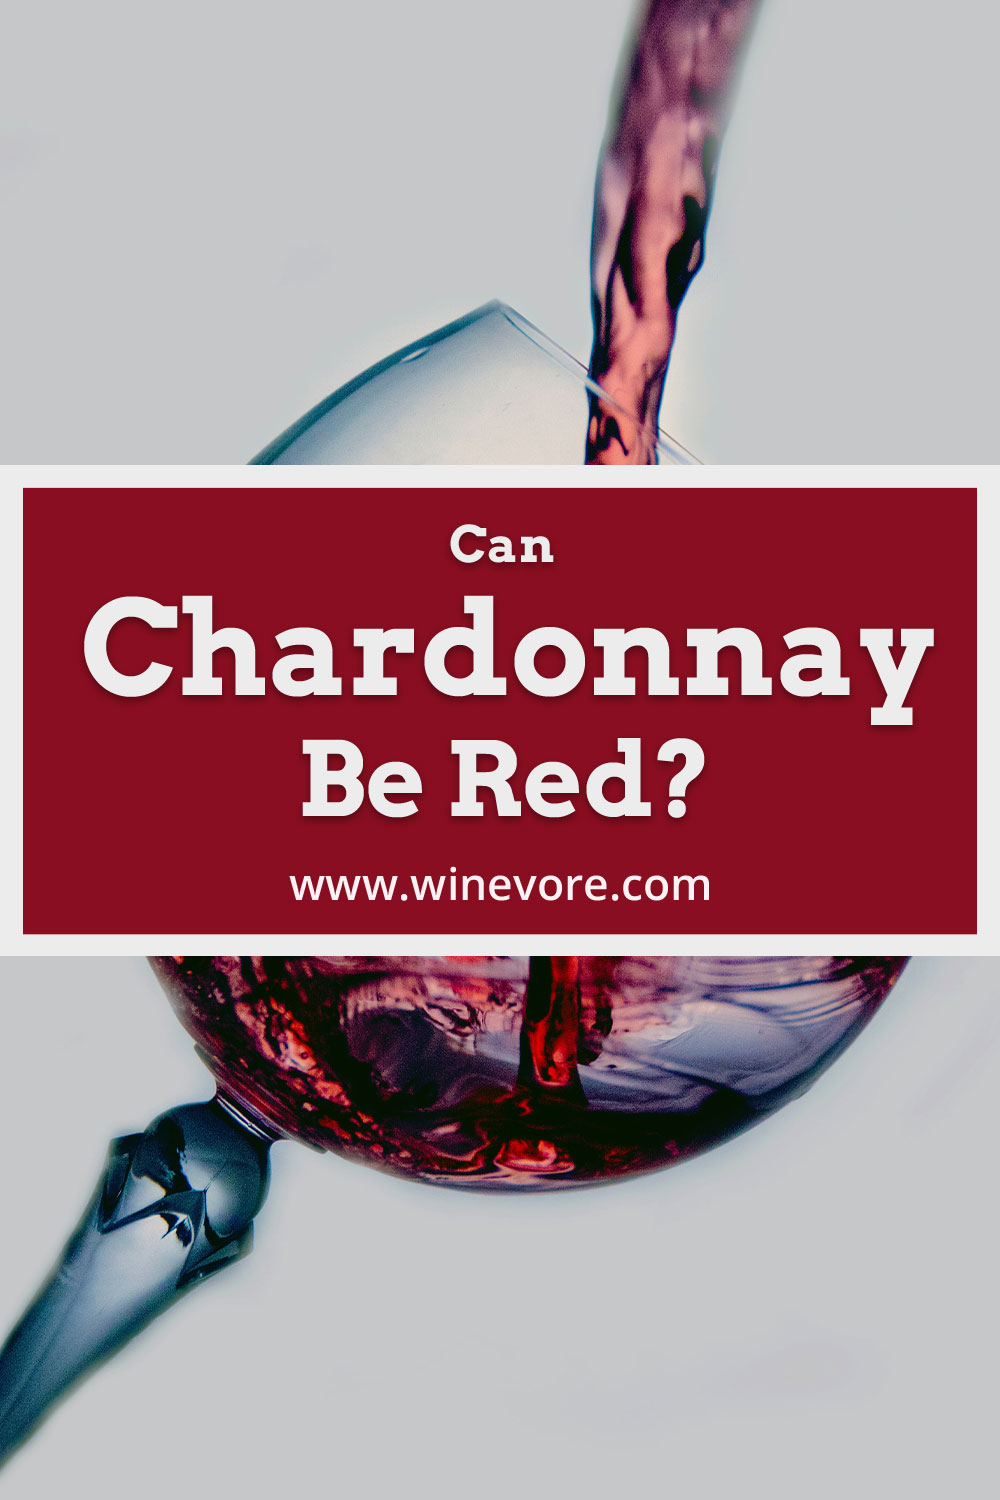 Pouring wine into a glass - Can Chardonnay Be Red?